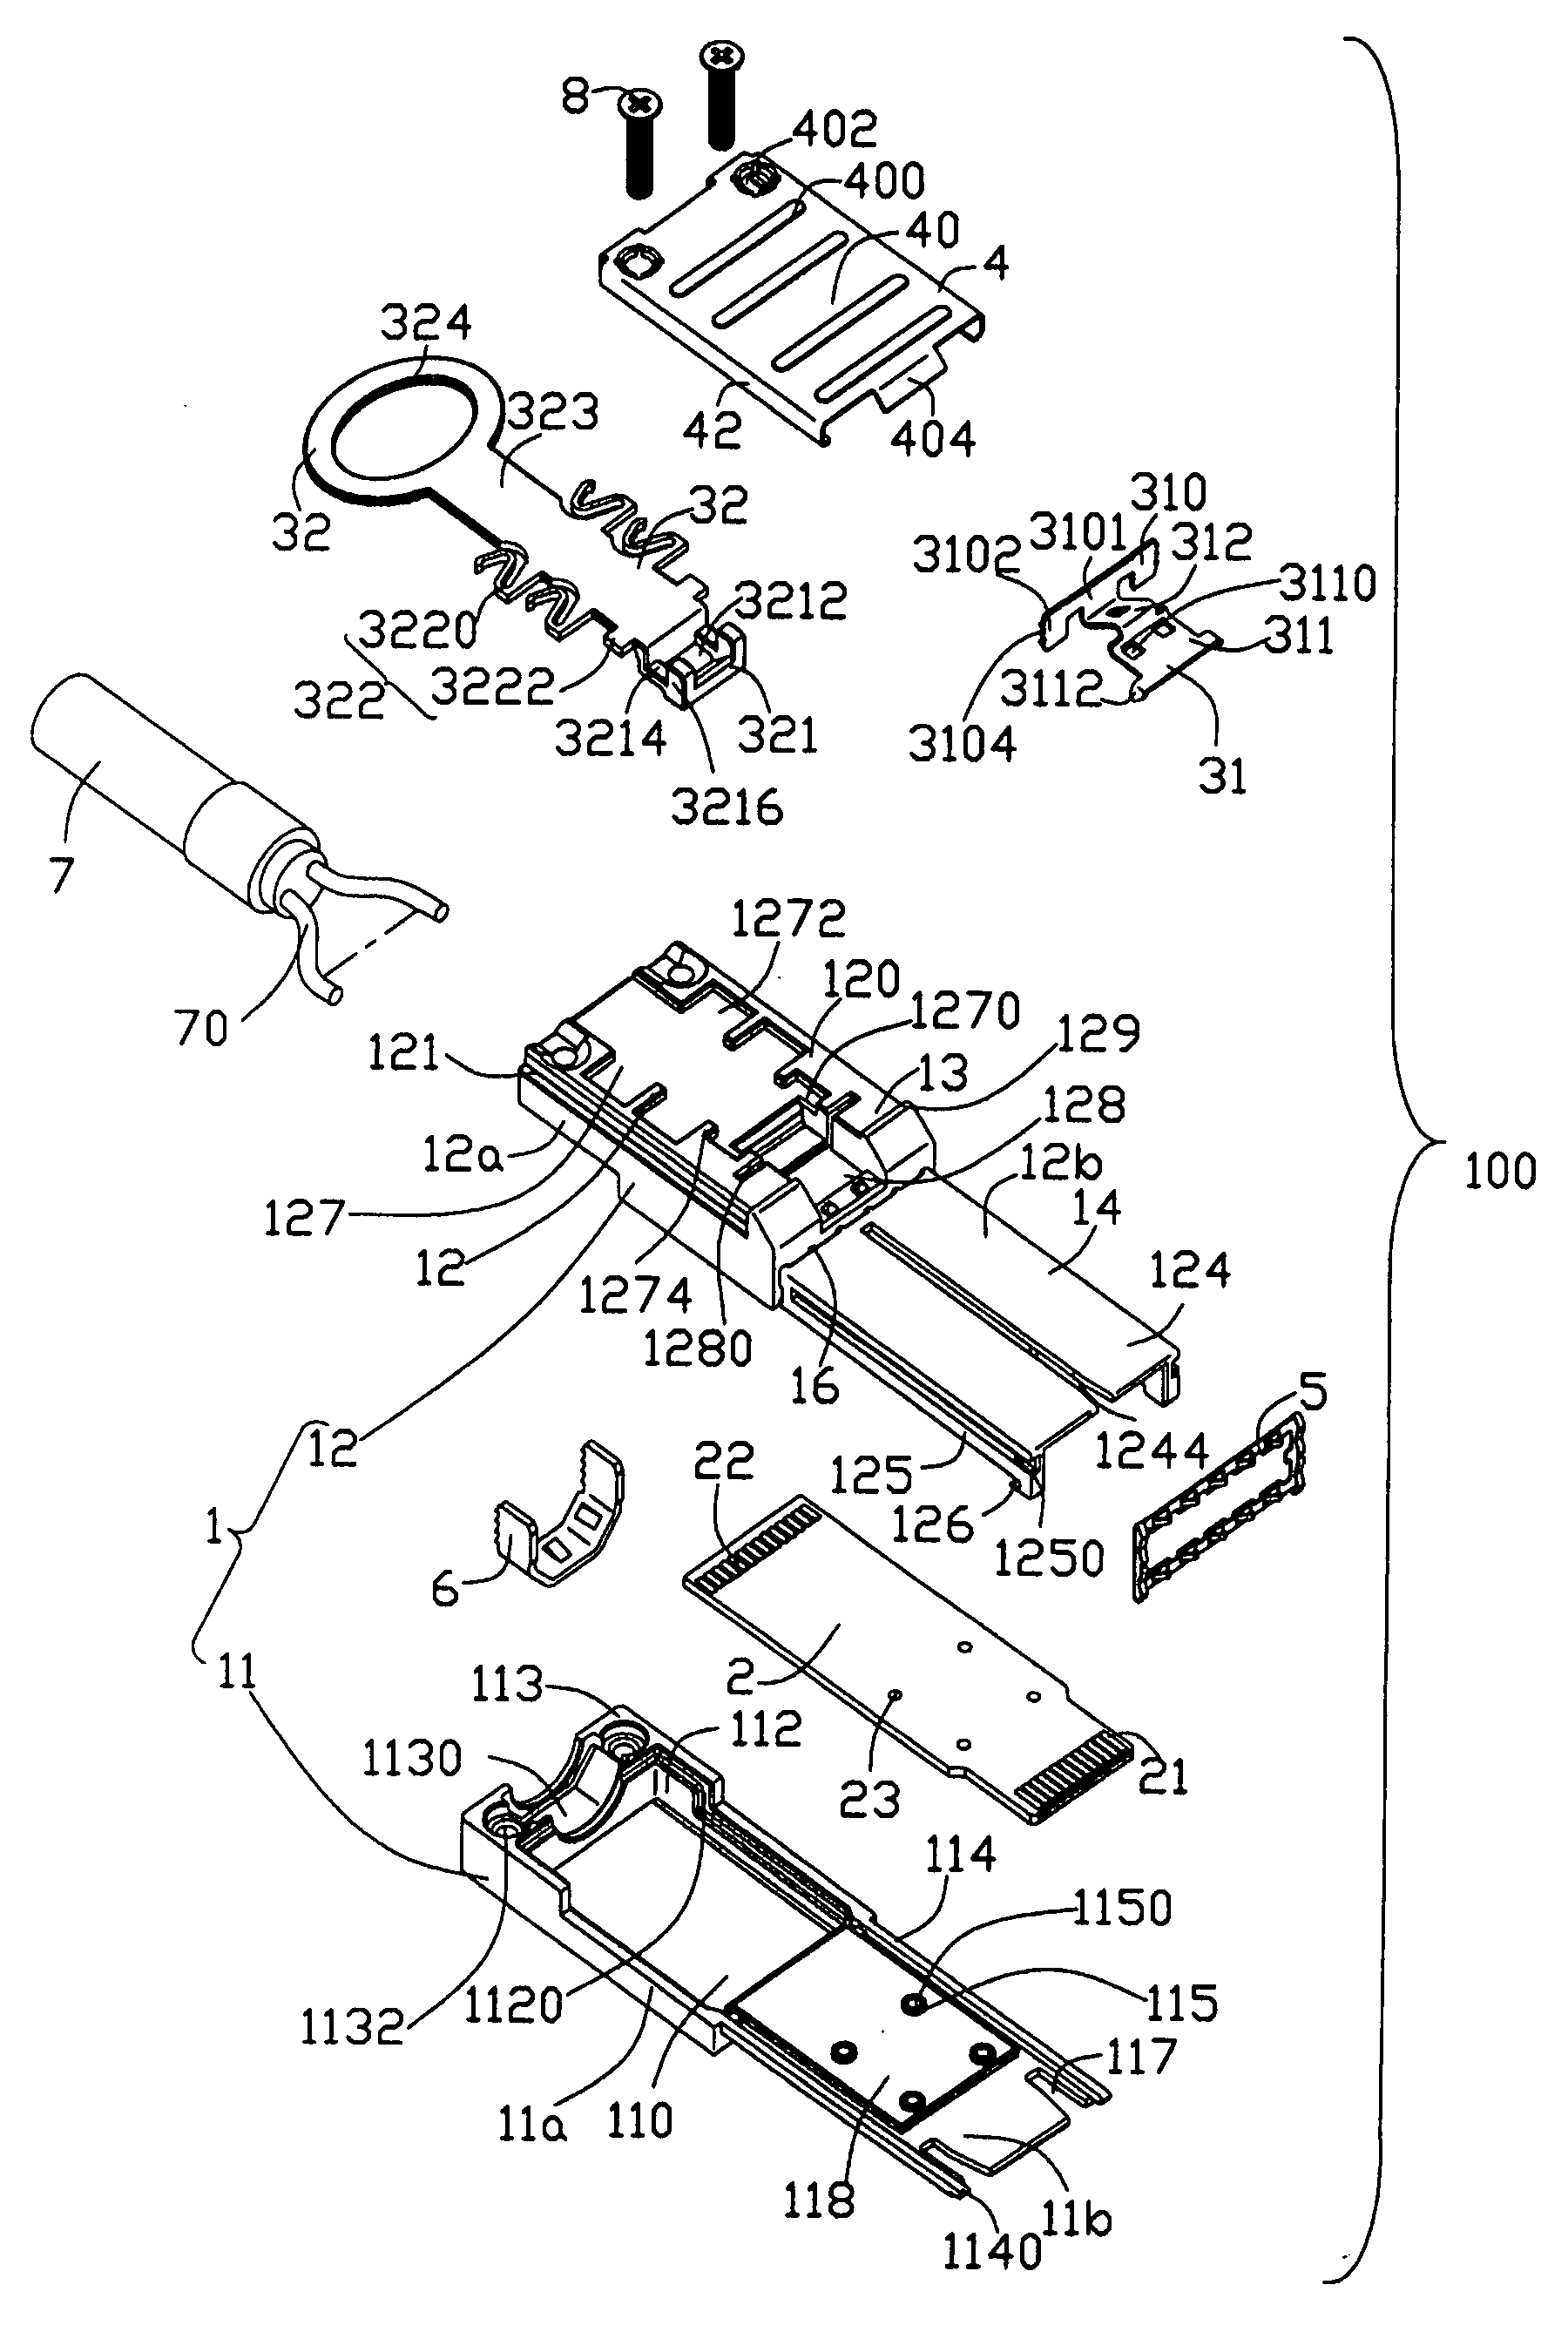 Plug connector with latching mechanism